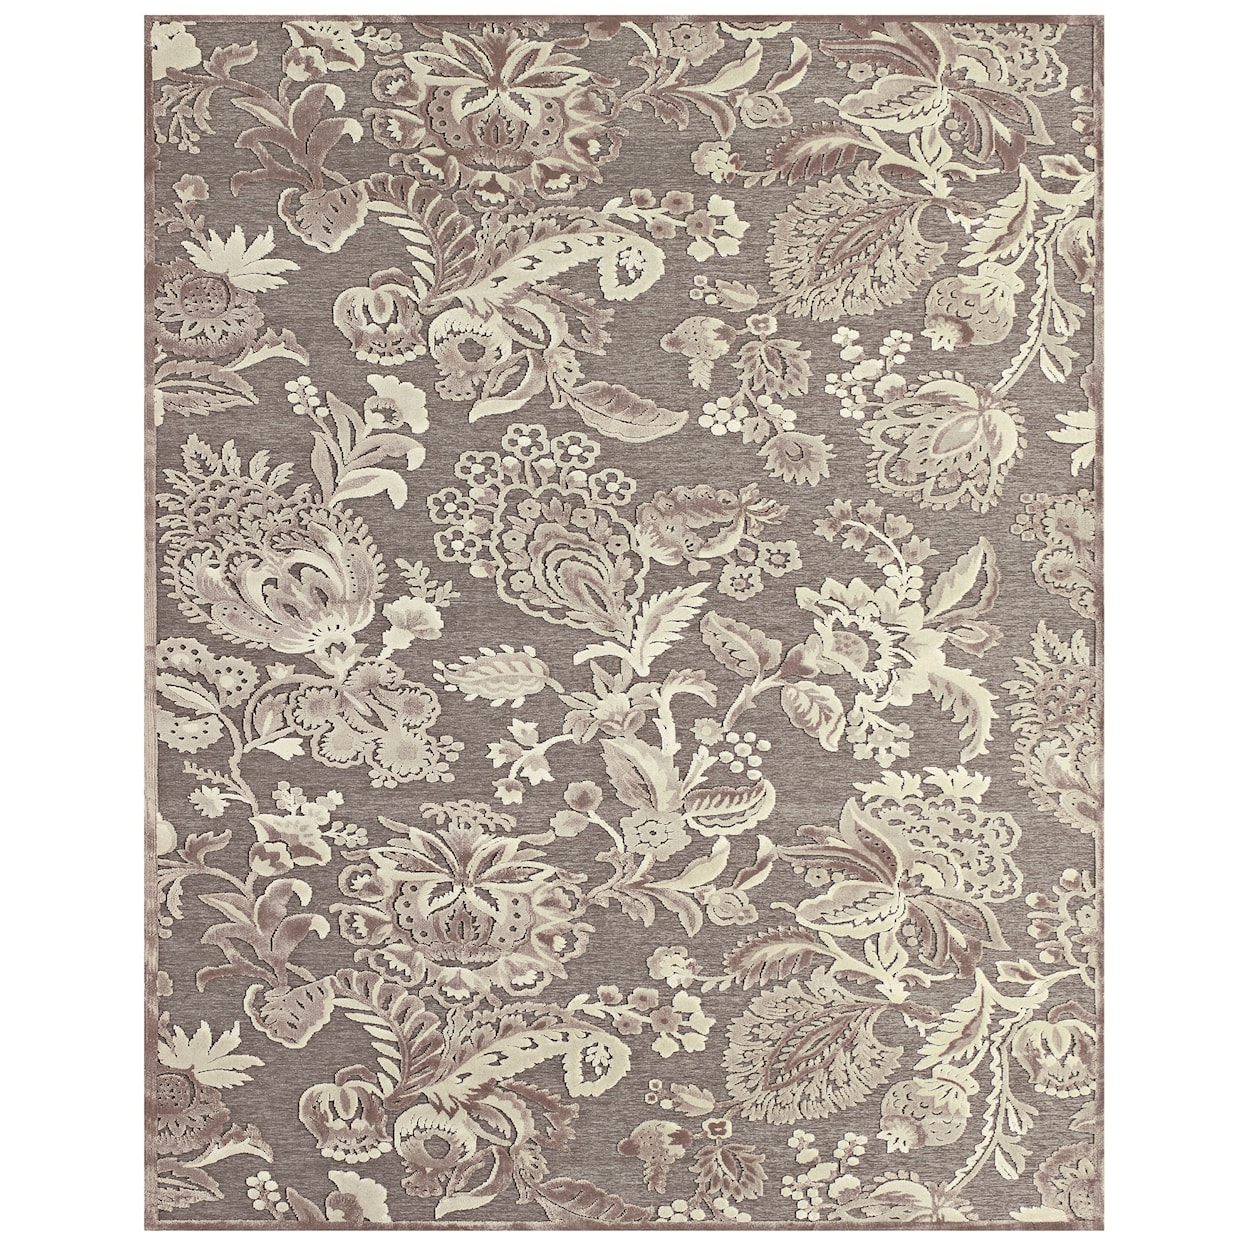 Feizy Rugs Saphir Zam Pewter/Gray 2'-2" x 4' Area Rug